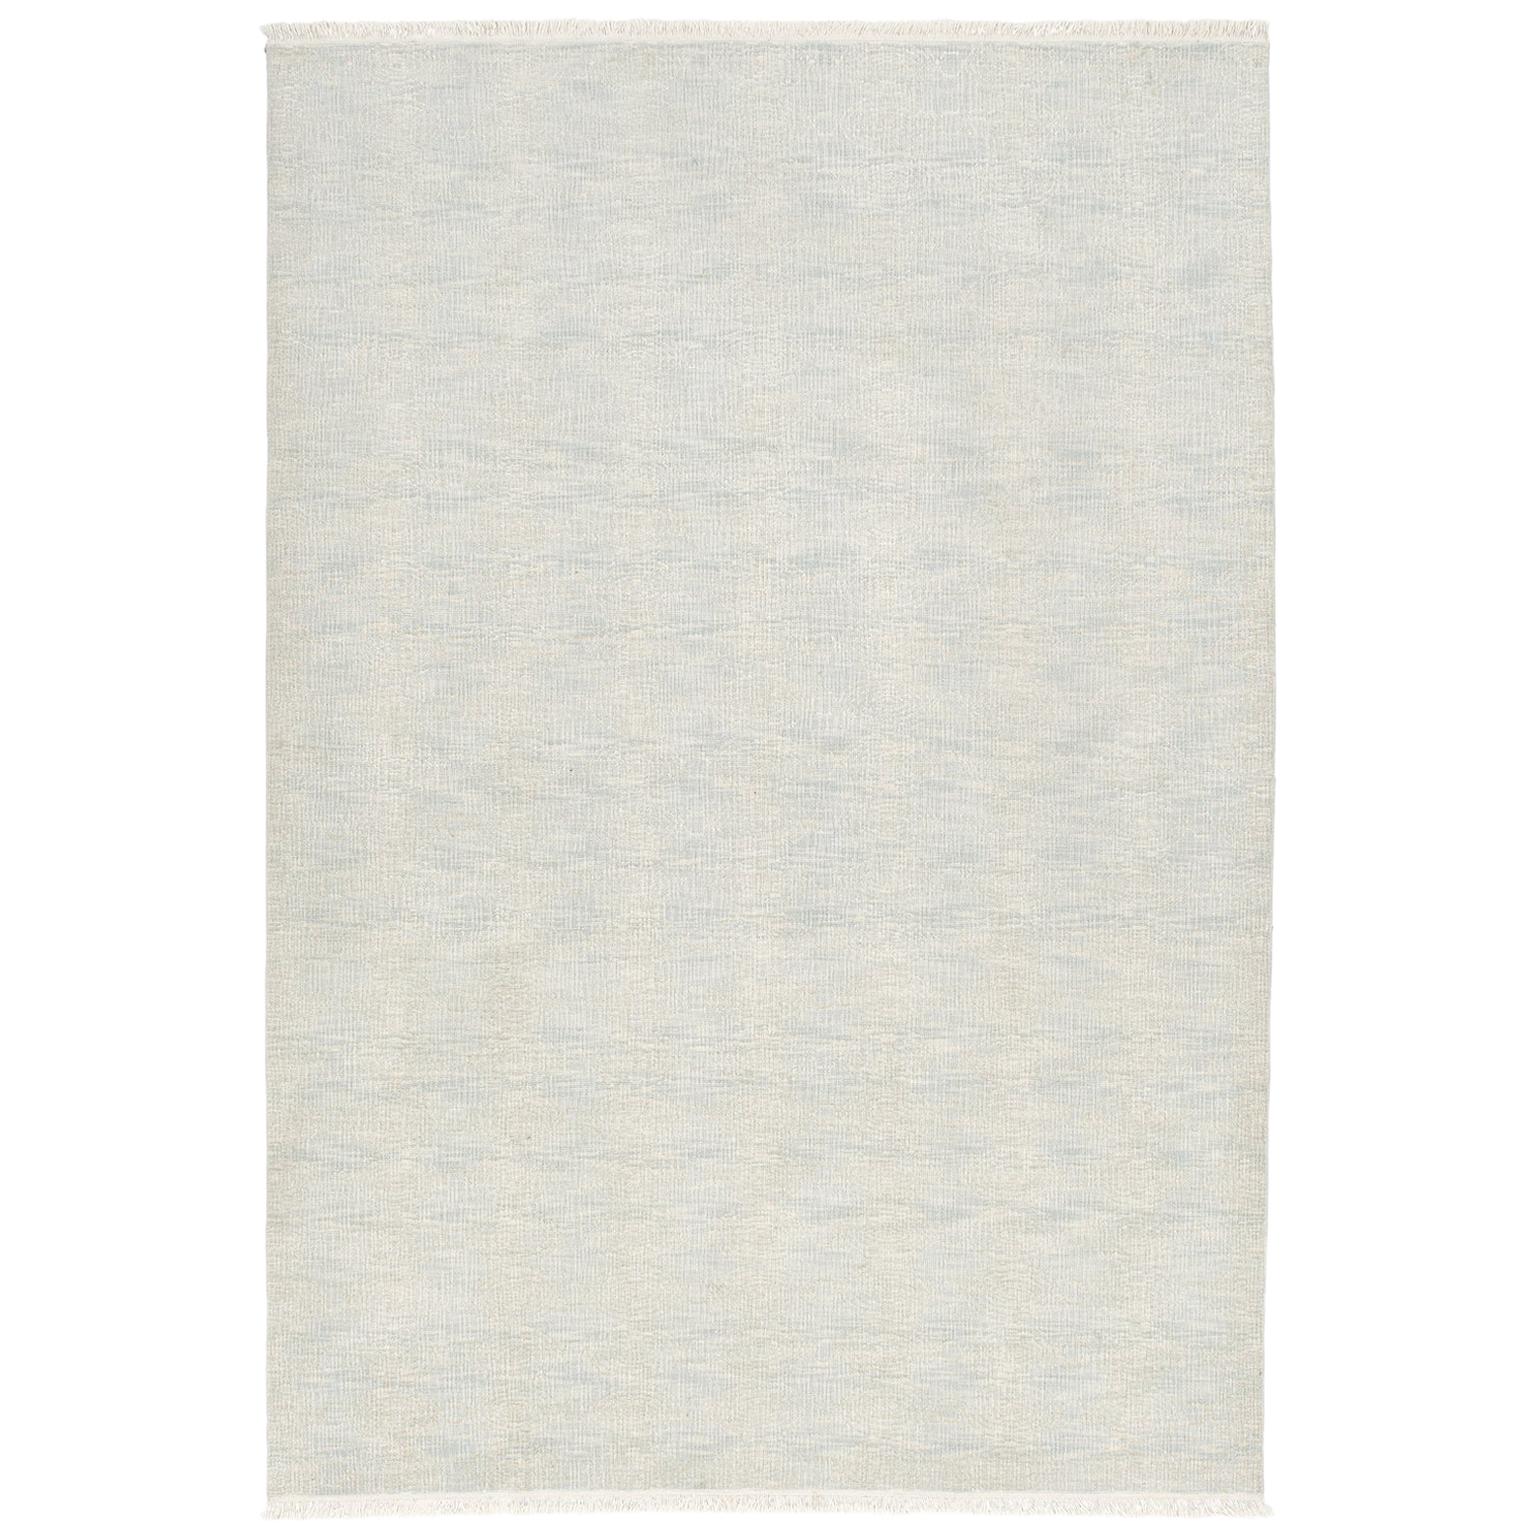 Schumacher Small Marble Islands Rug in Wool by Patterson Flynn Martin